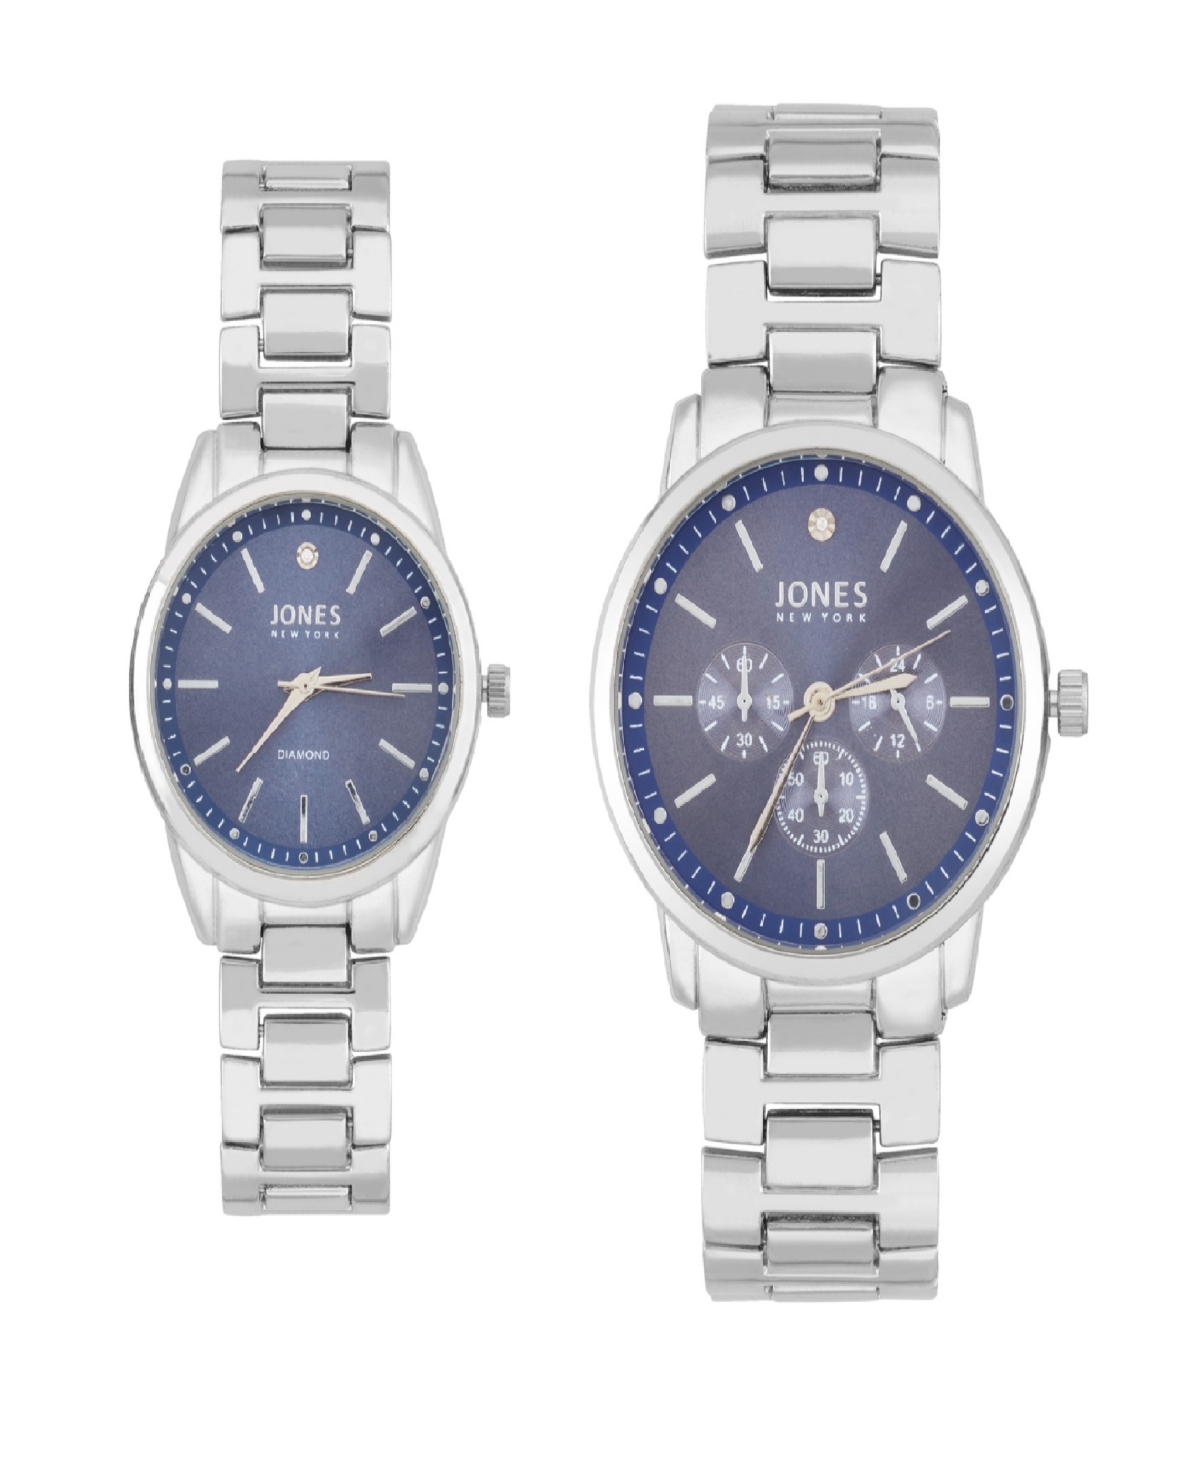 Men and Women's Analog Shiny Silver-Tone Metal Bracelet His Hers Watch 42mm, 32mm Gift Set - Light Blue, Silver